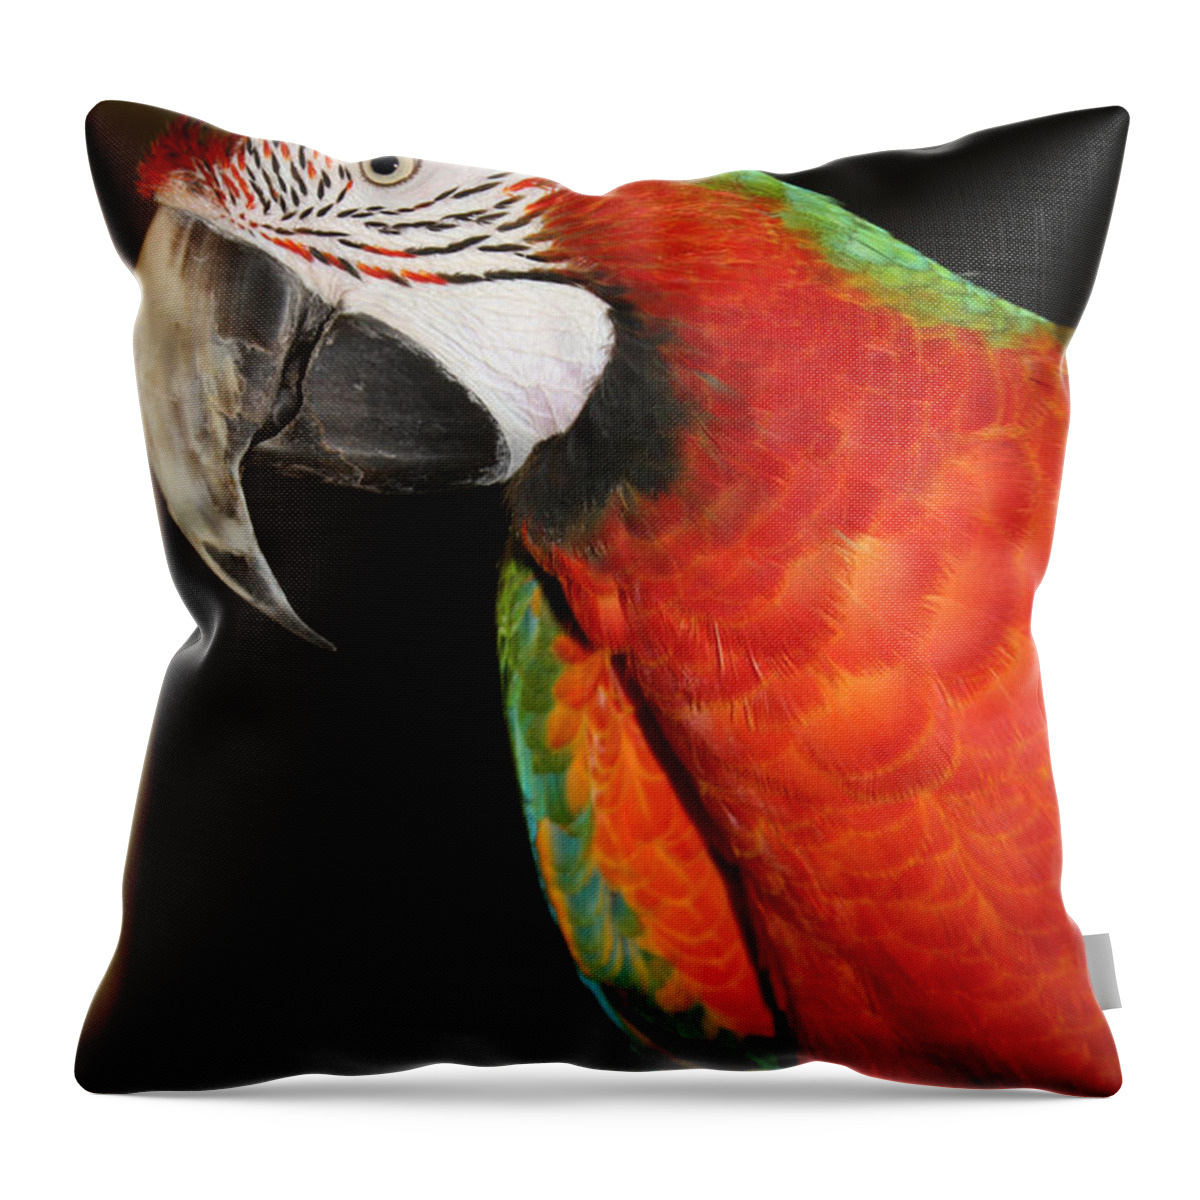 Macaw Profile Throw Pillow featuring the photograph Macaw Profile by John Telfer